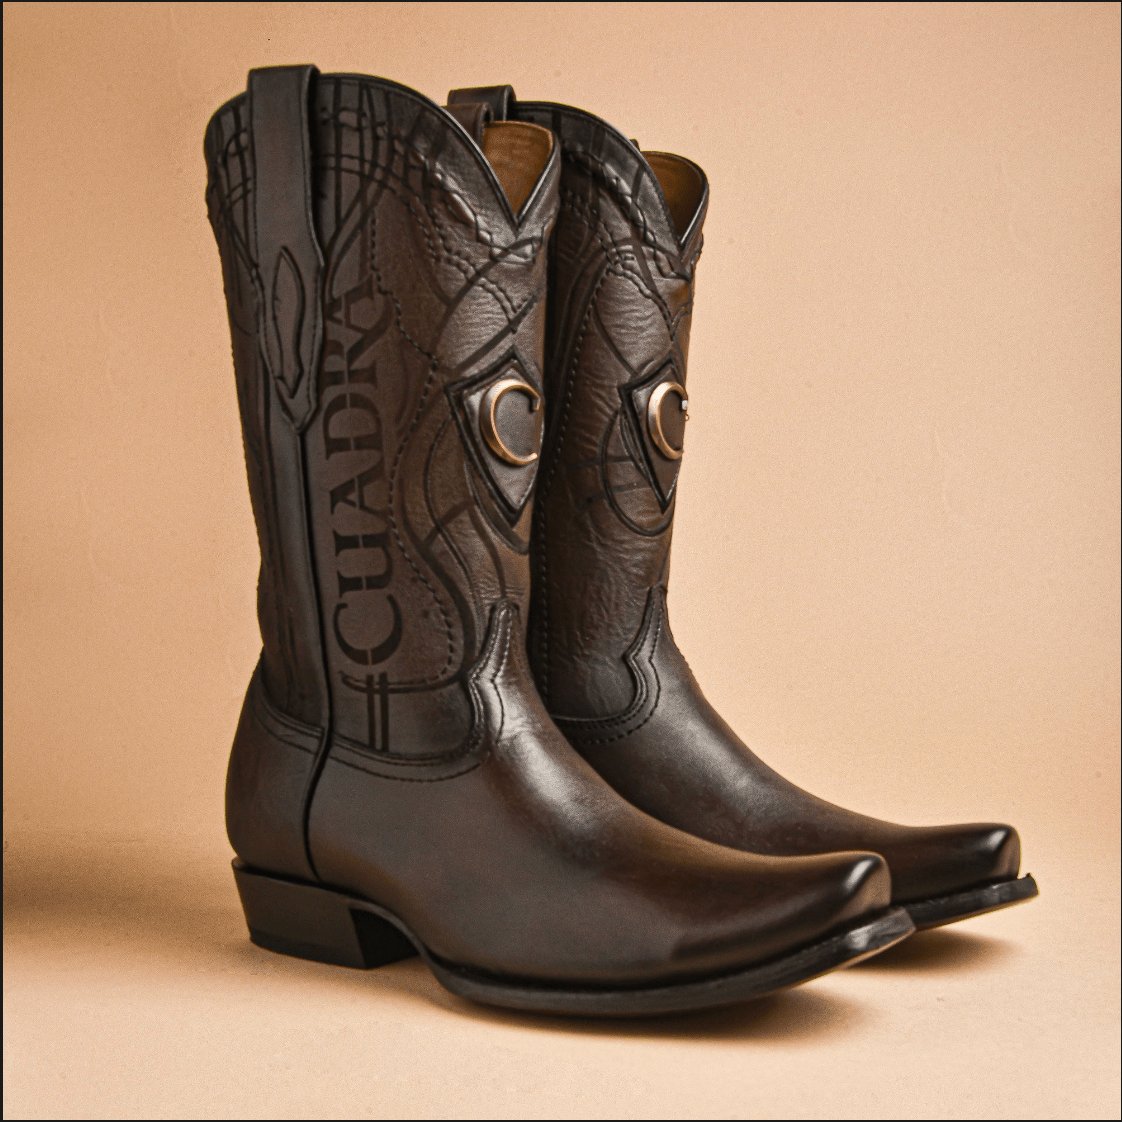 Cuadra Boots, genuine leather boots for men | Cuadra Shop Page 2